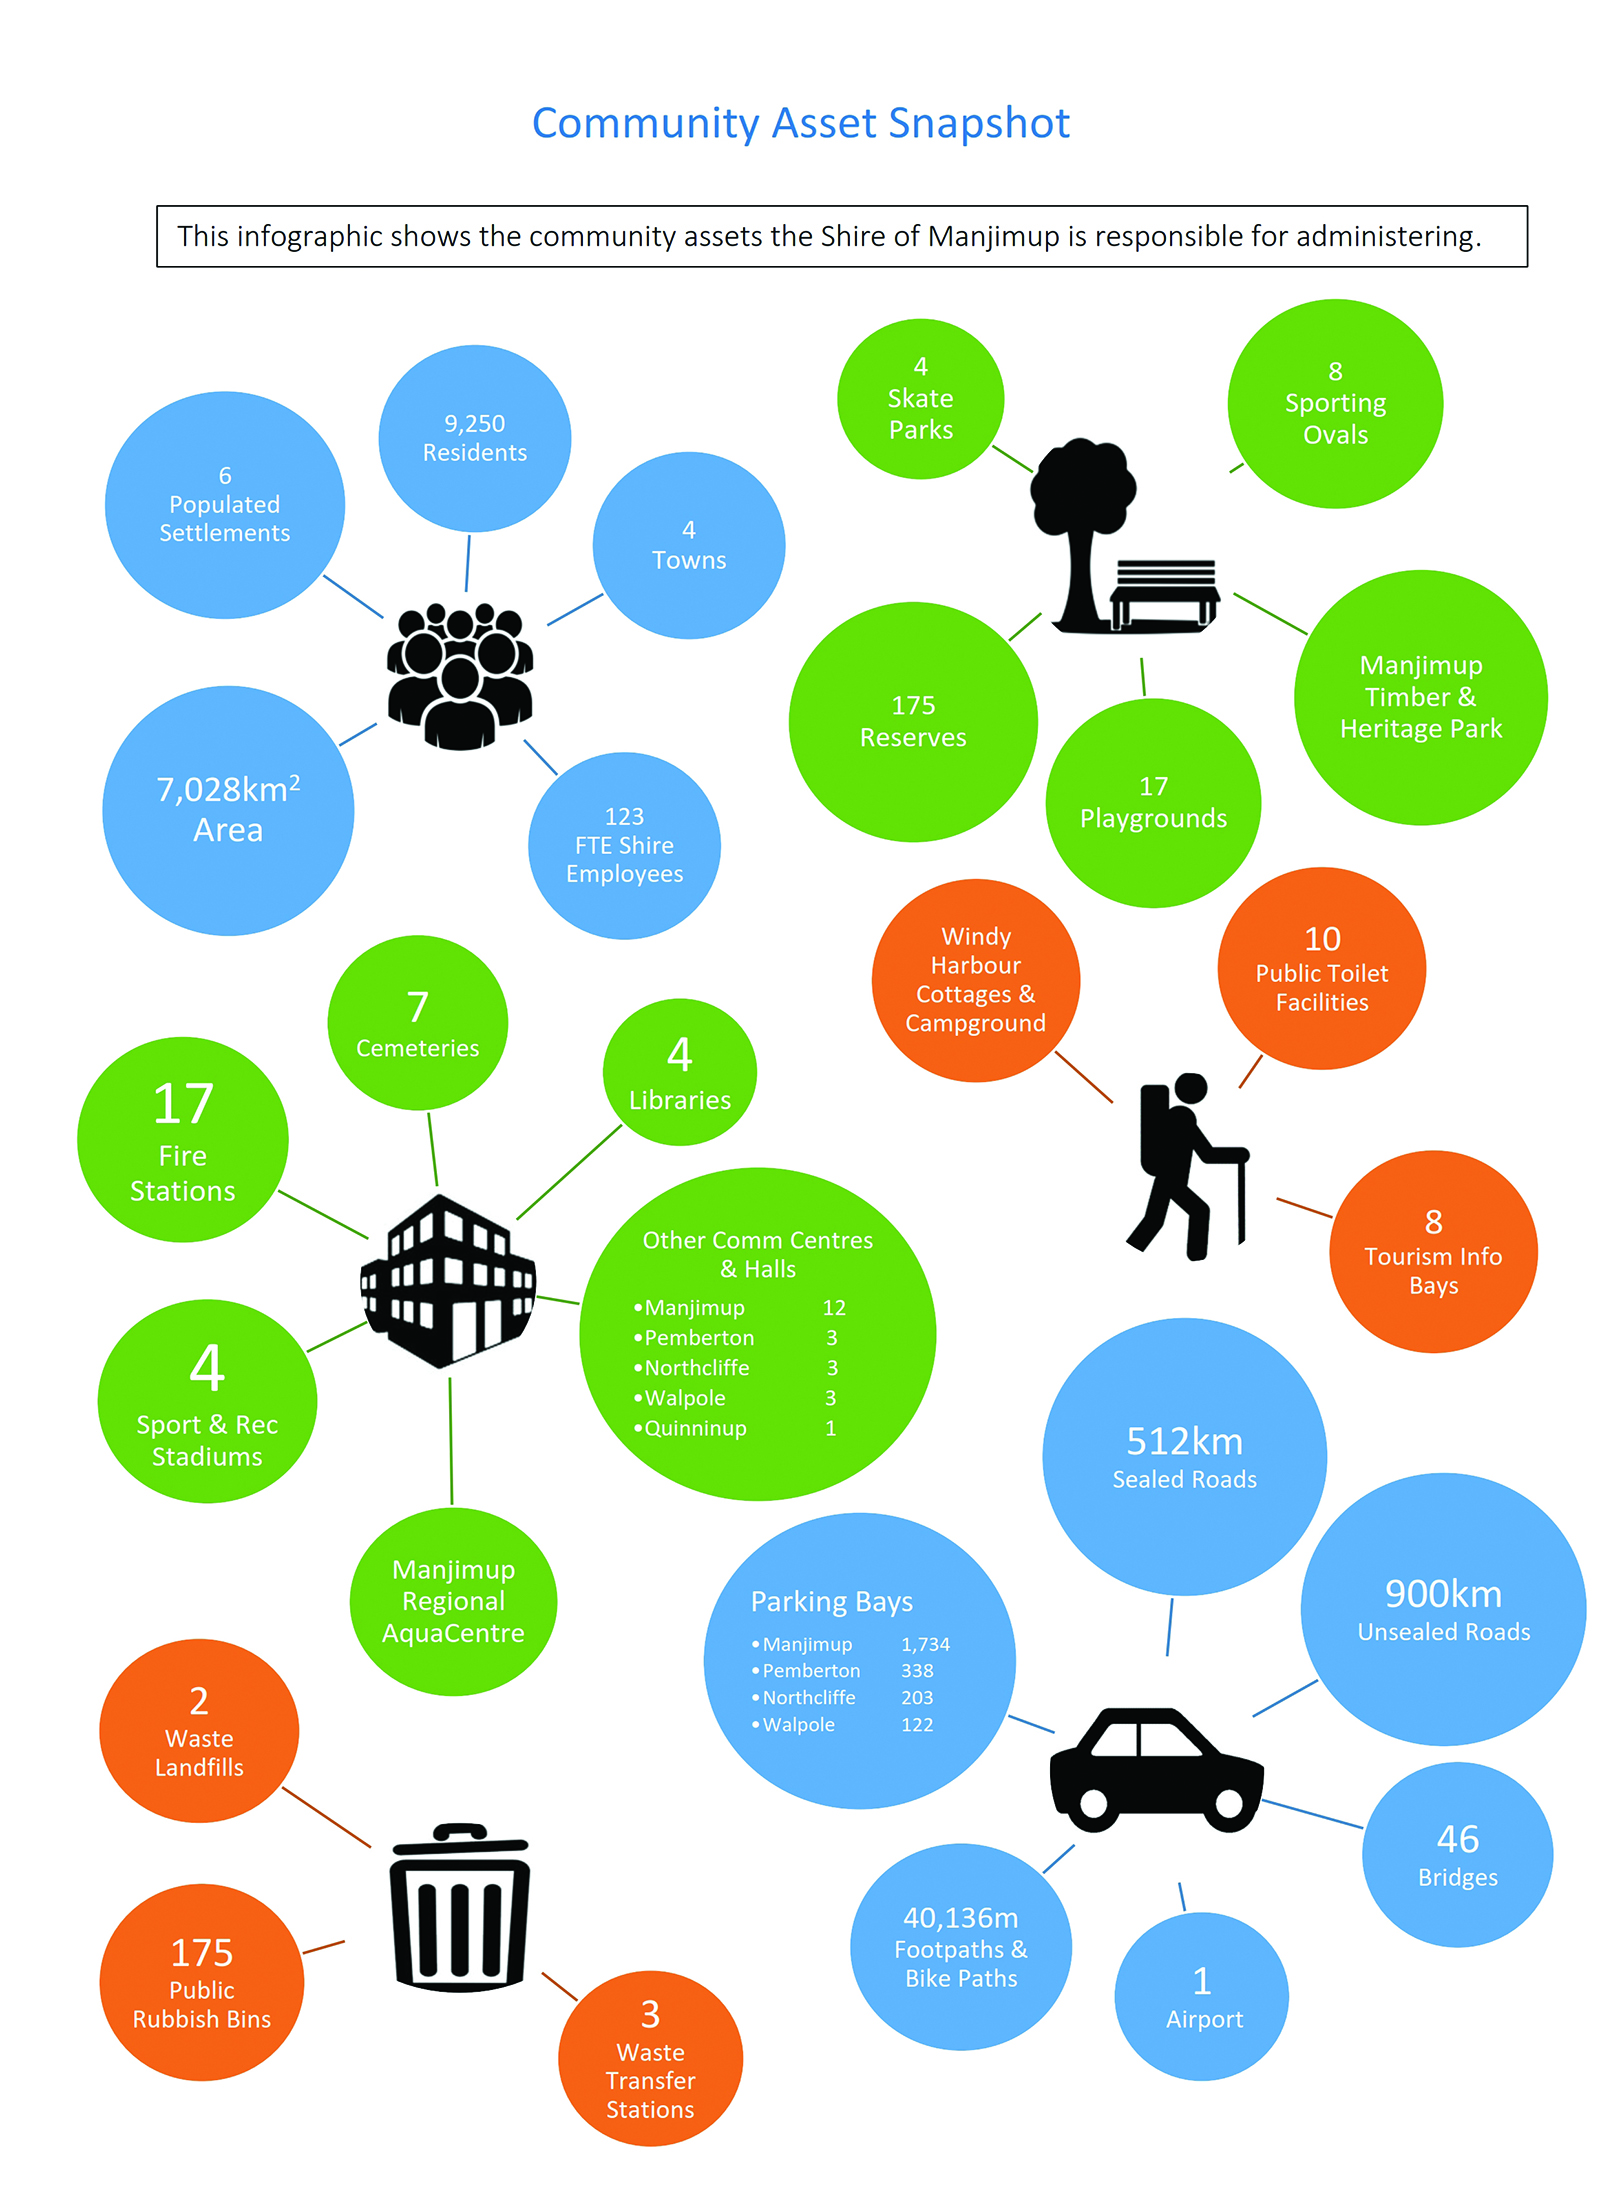 Community asset snapshot show all the facilities the shire manages.